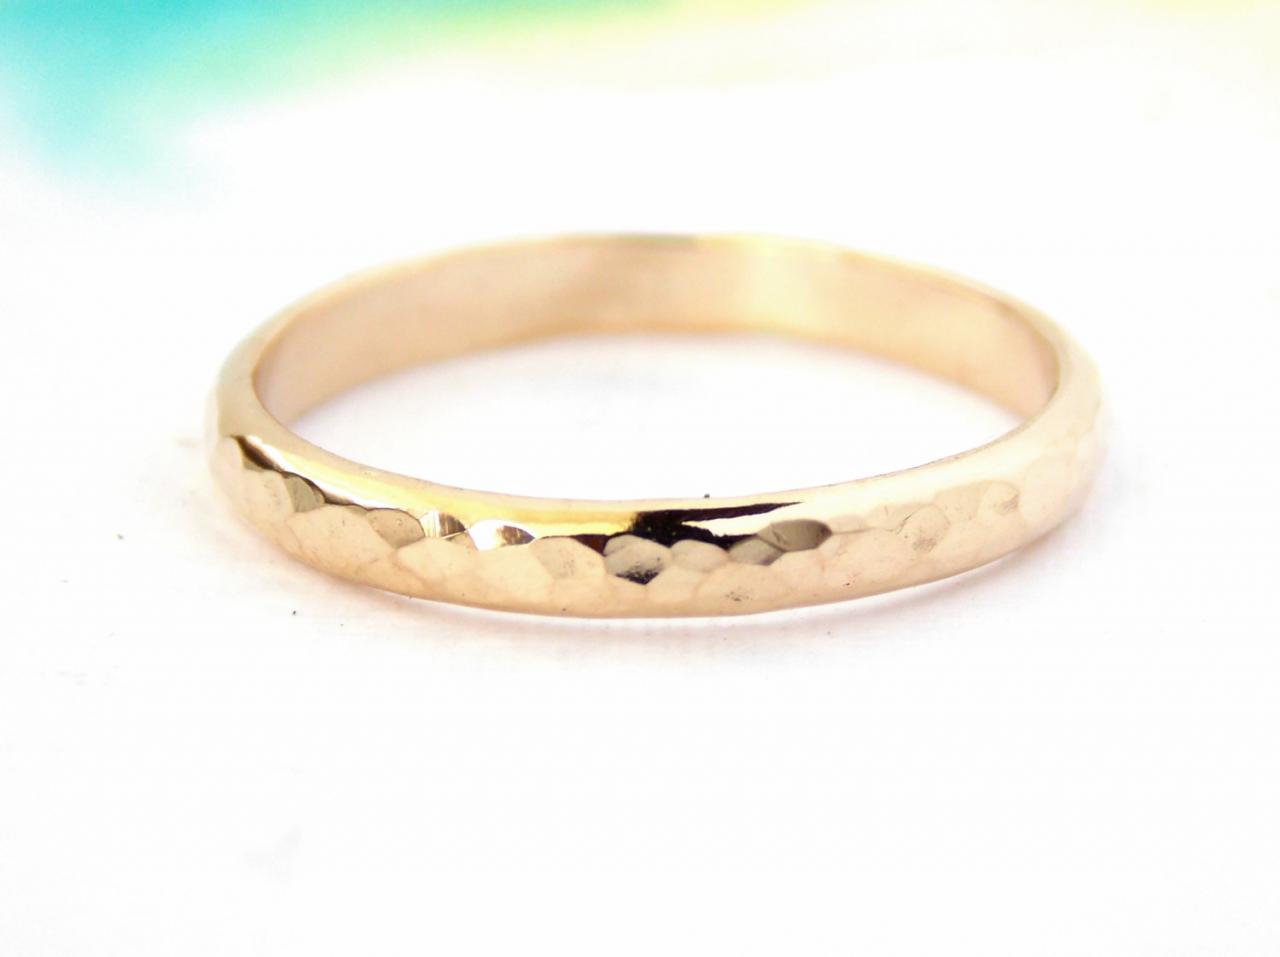 Gold-filled Hammered Band Ring: Textured Ring, Simple Ring, Golden Ring, Wedding Band, Men's Ring, Hammered Ring, Wedding Ring